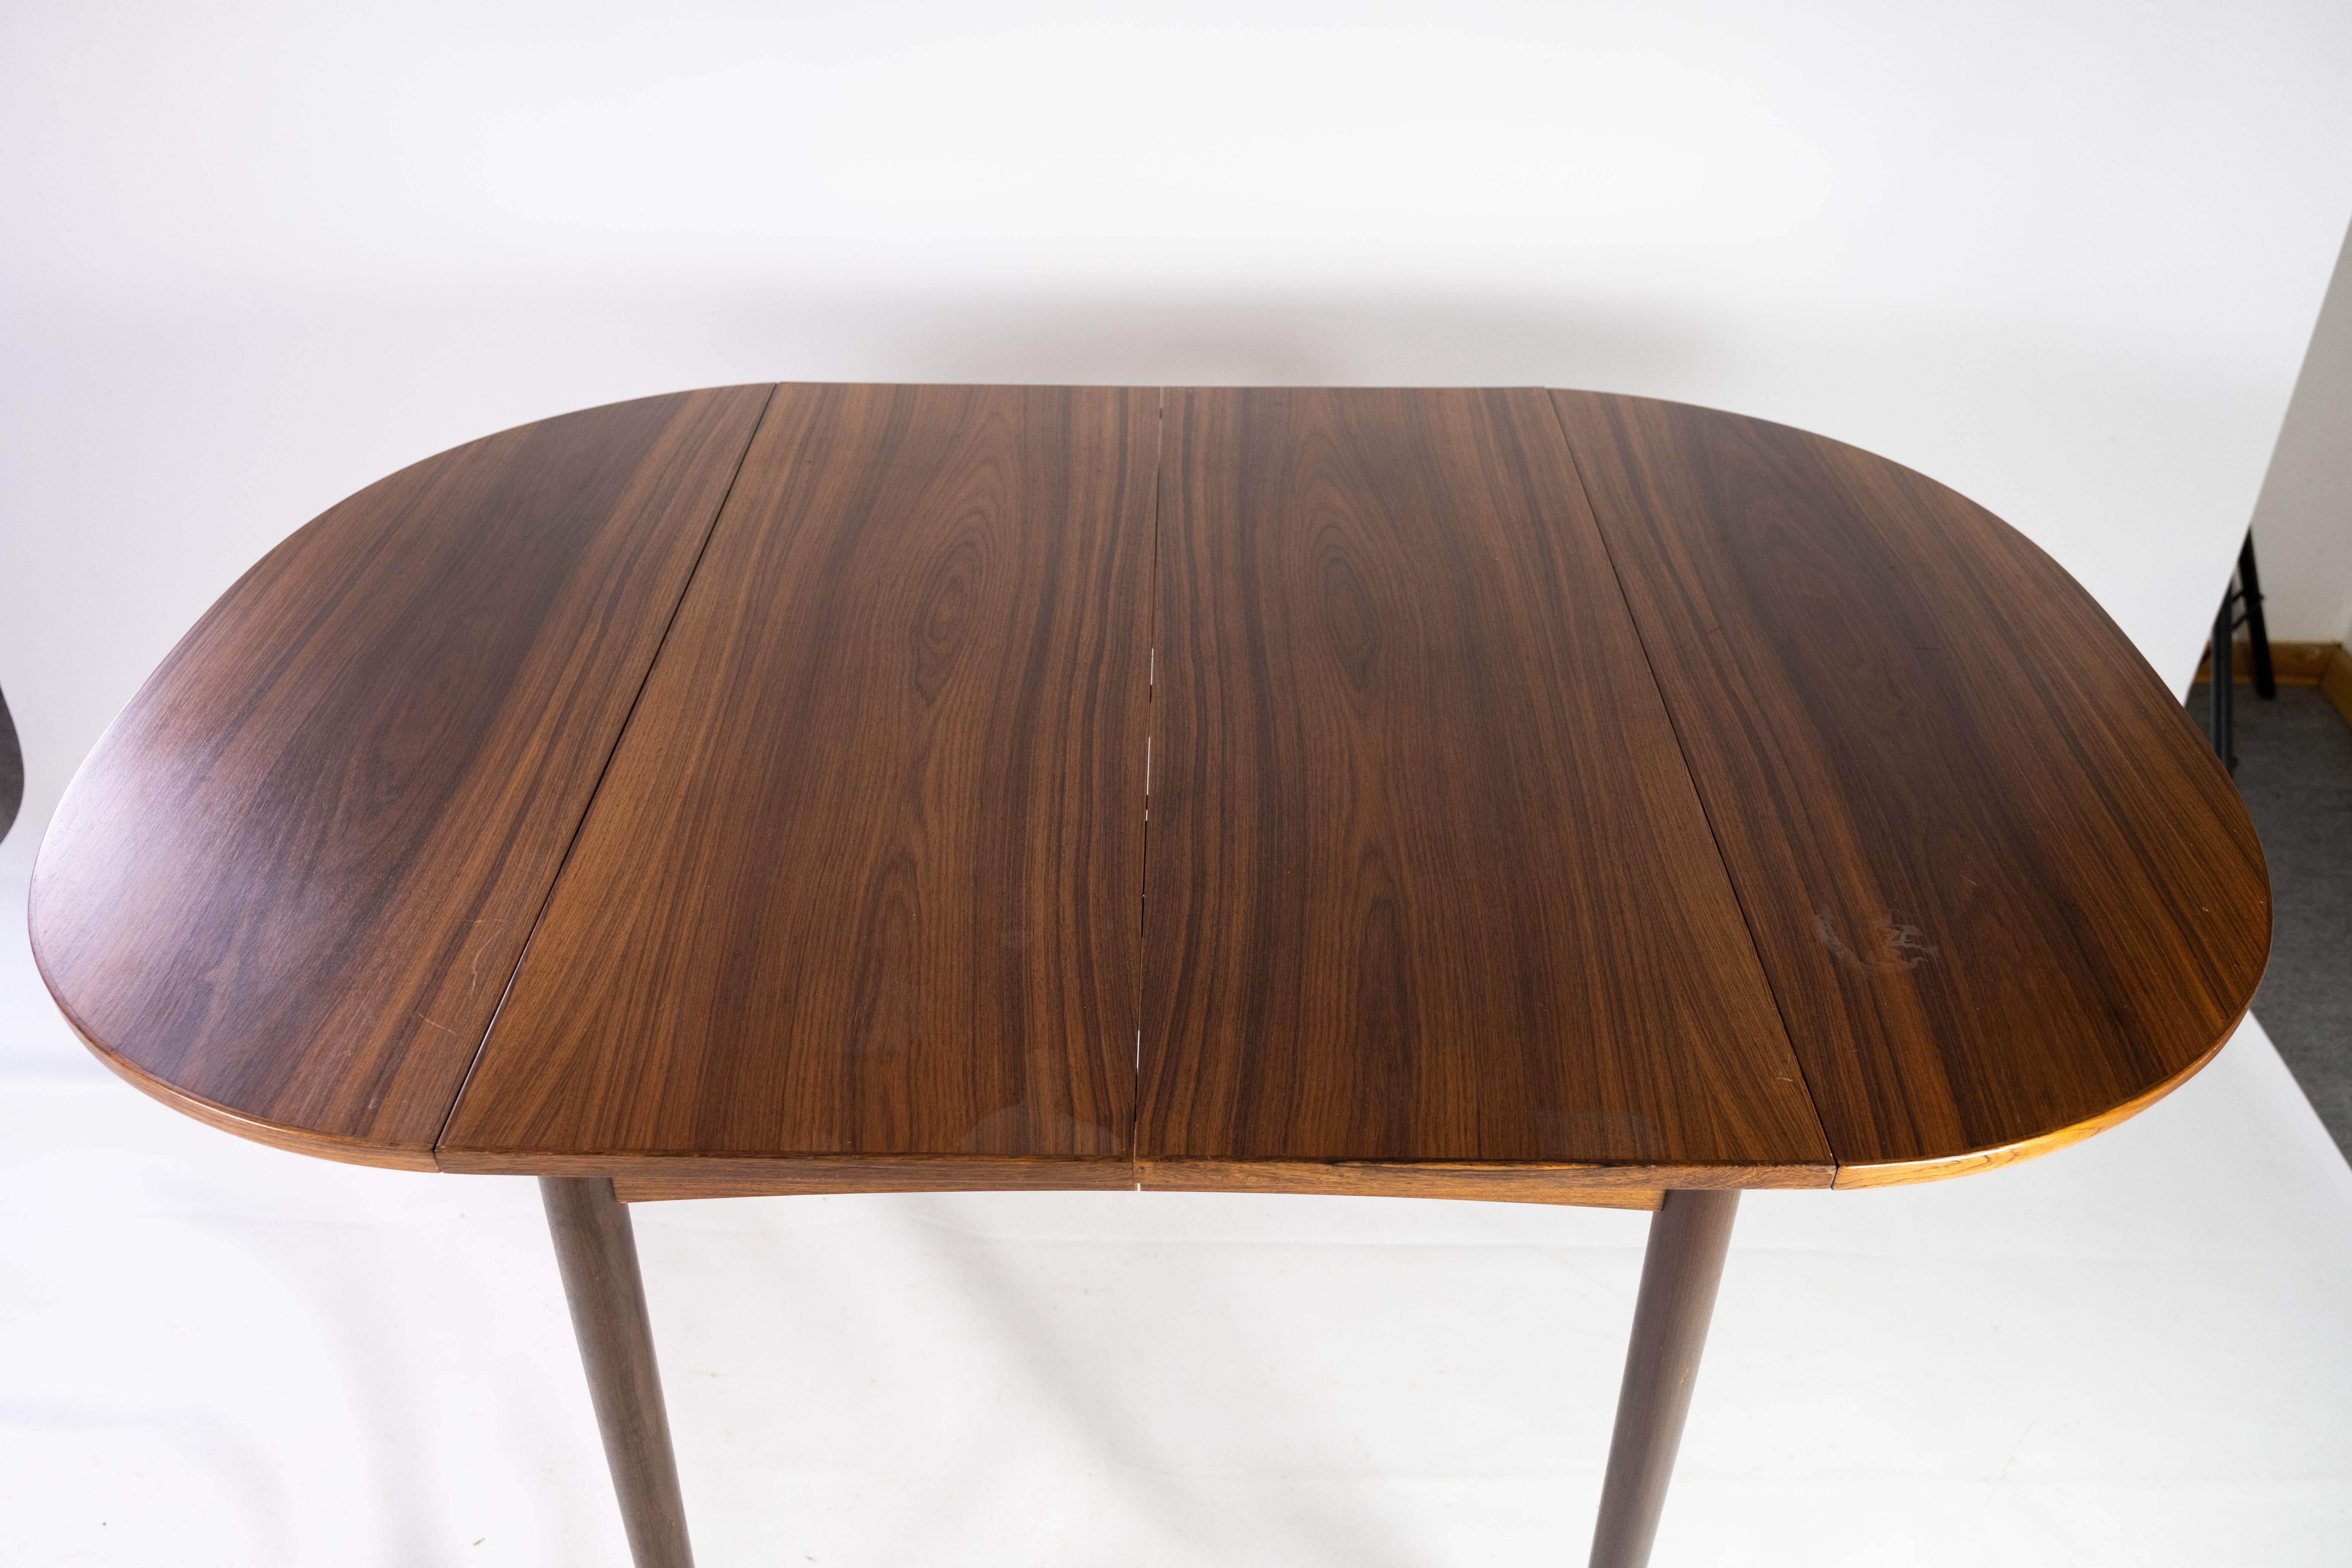 Scandinavian Modern Dining Table with Extension in Rosewood Designed by Arne Vodder from the 1960s